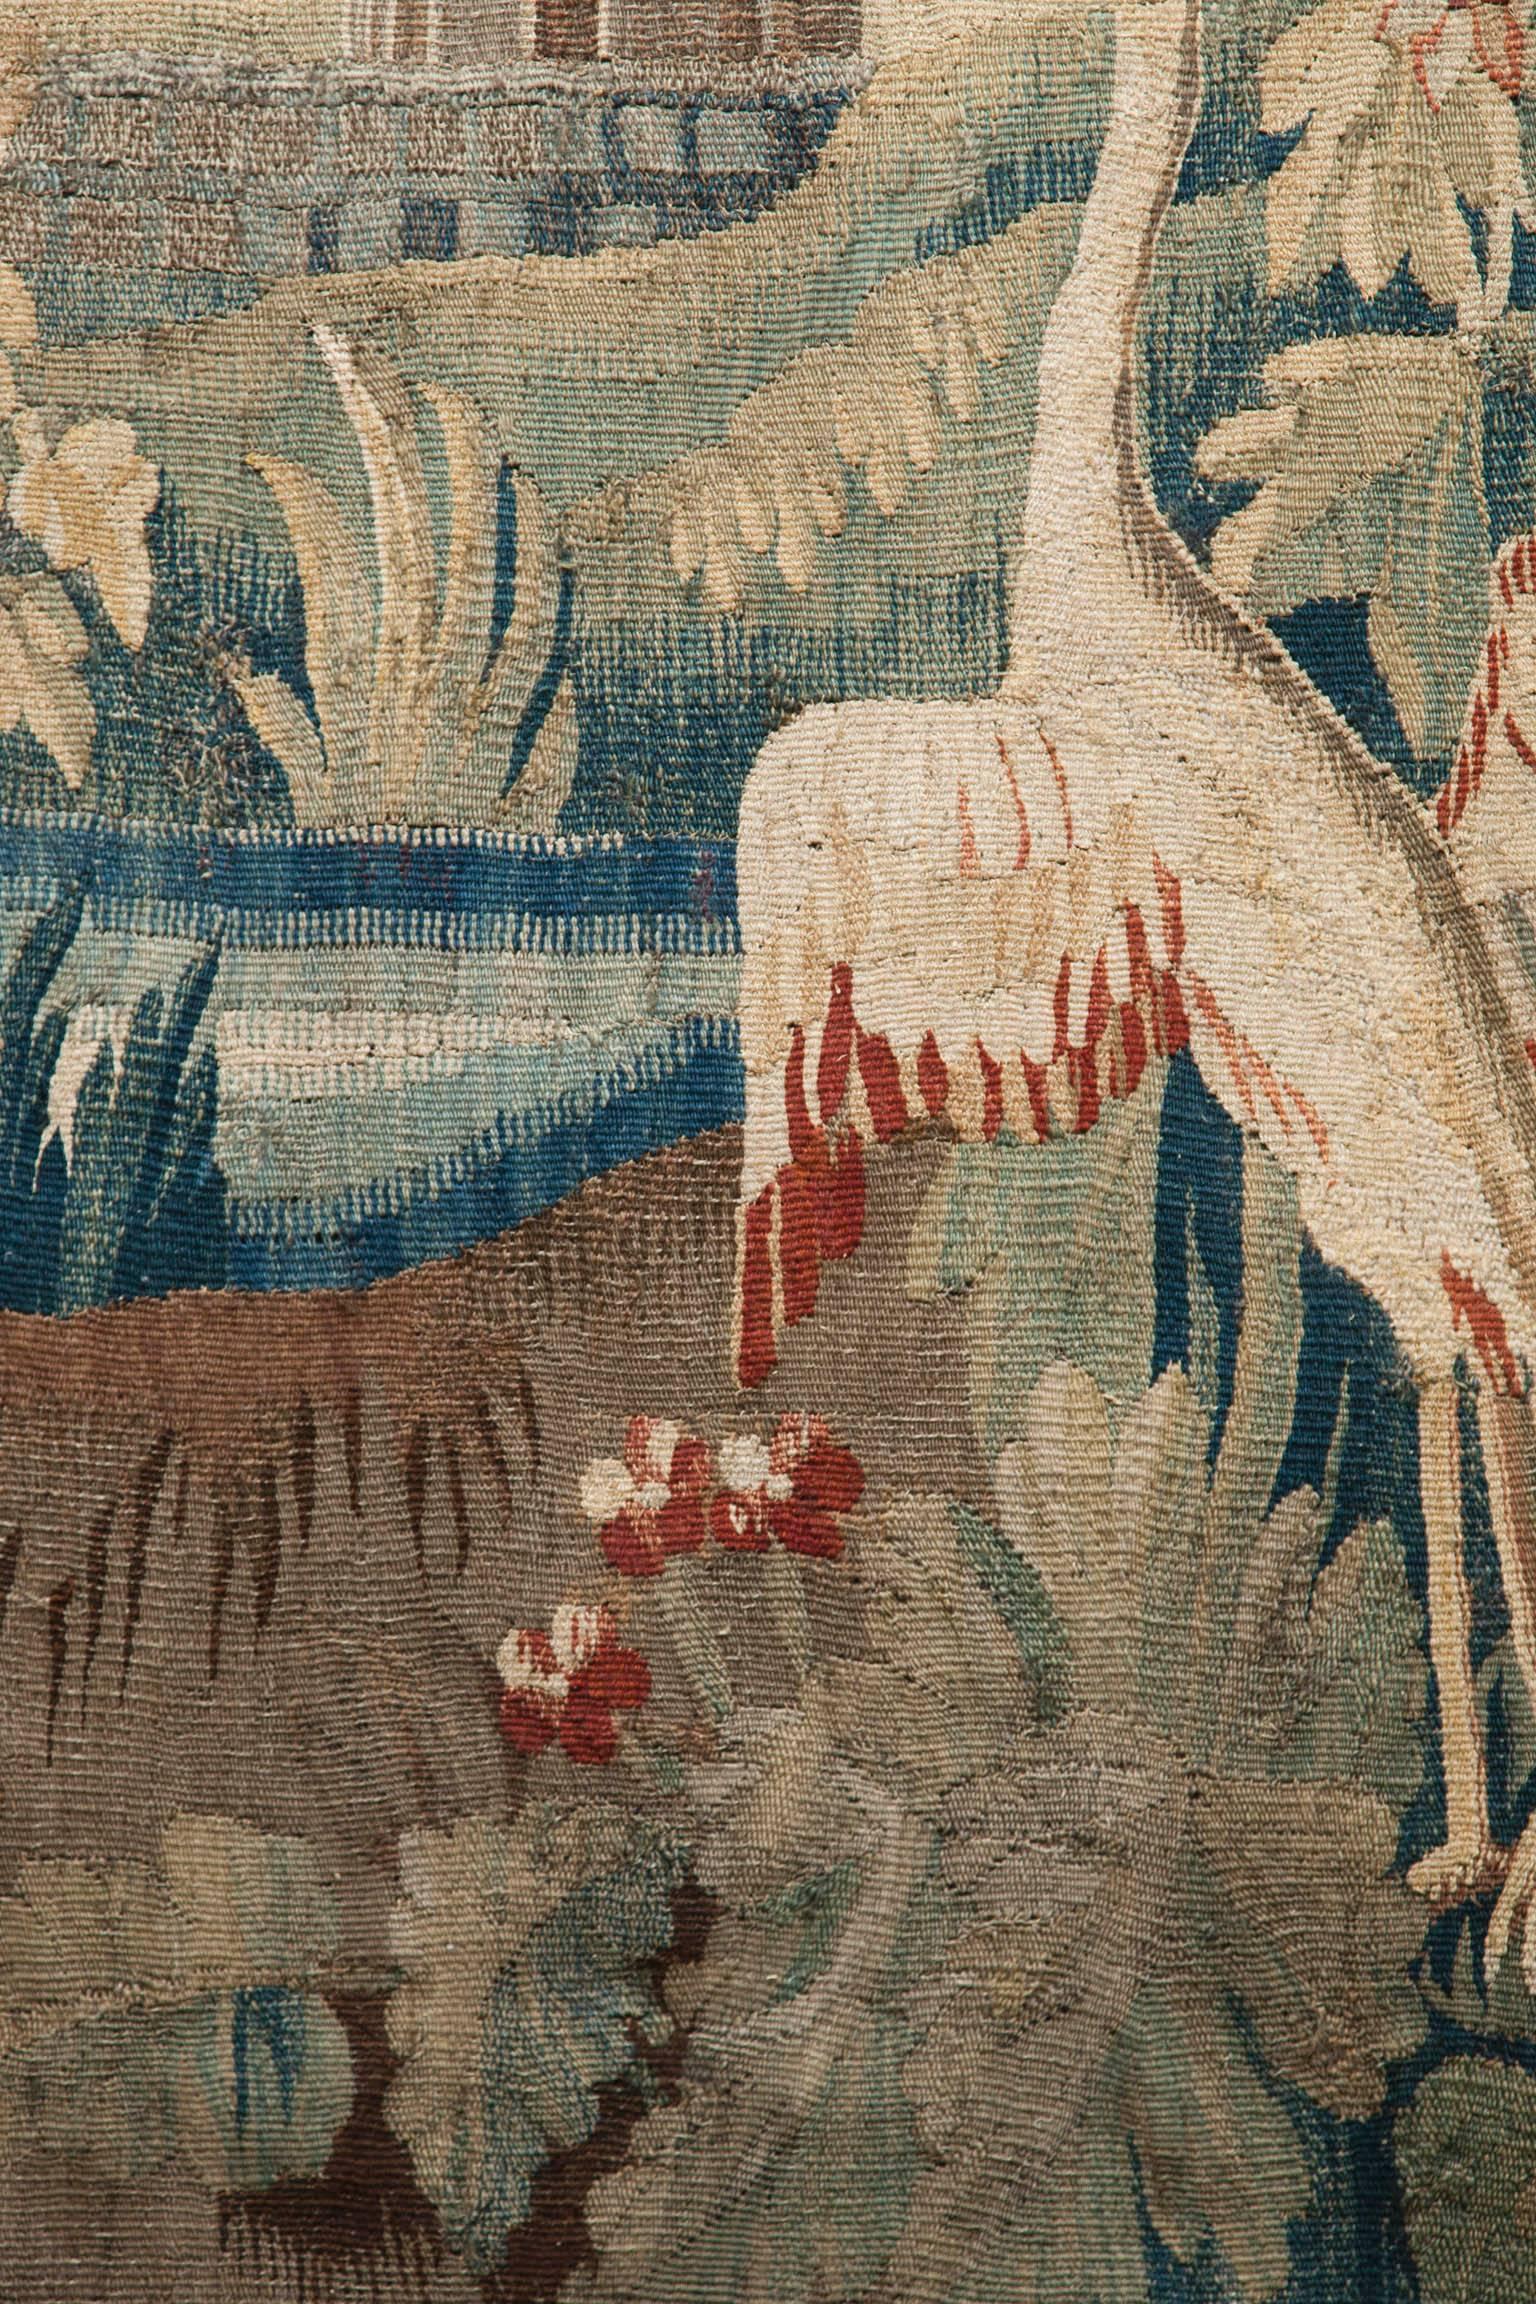 French 18th Century Aubusson Tapestry Fragment after a Cartoon by Pillement